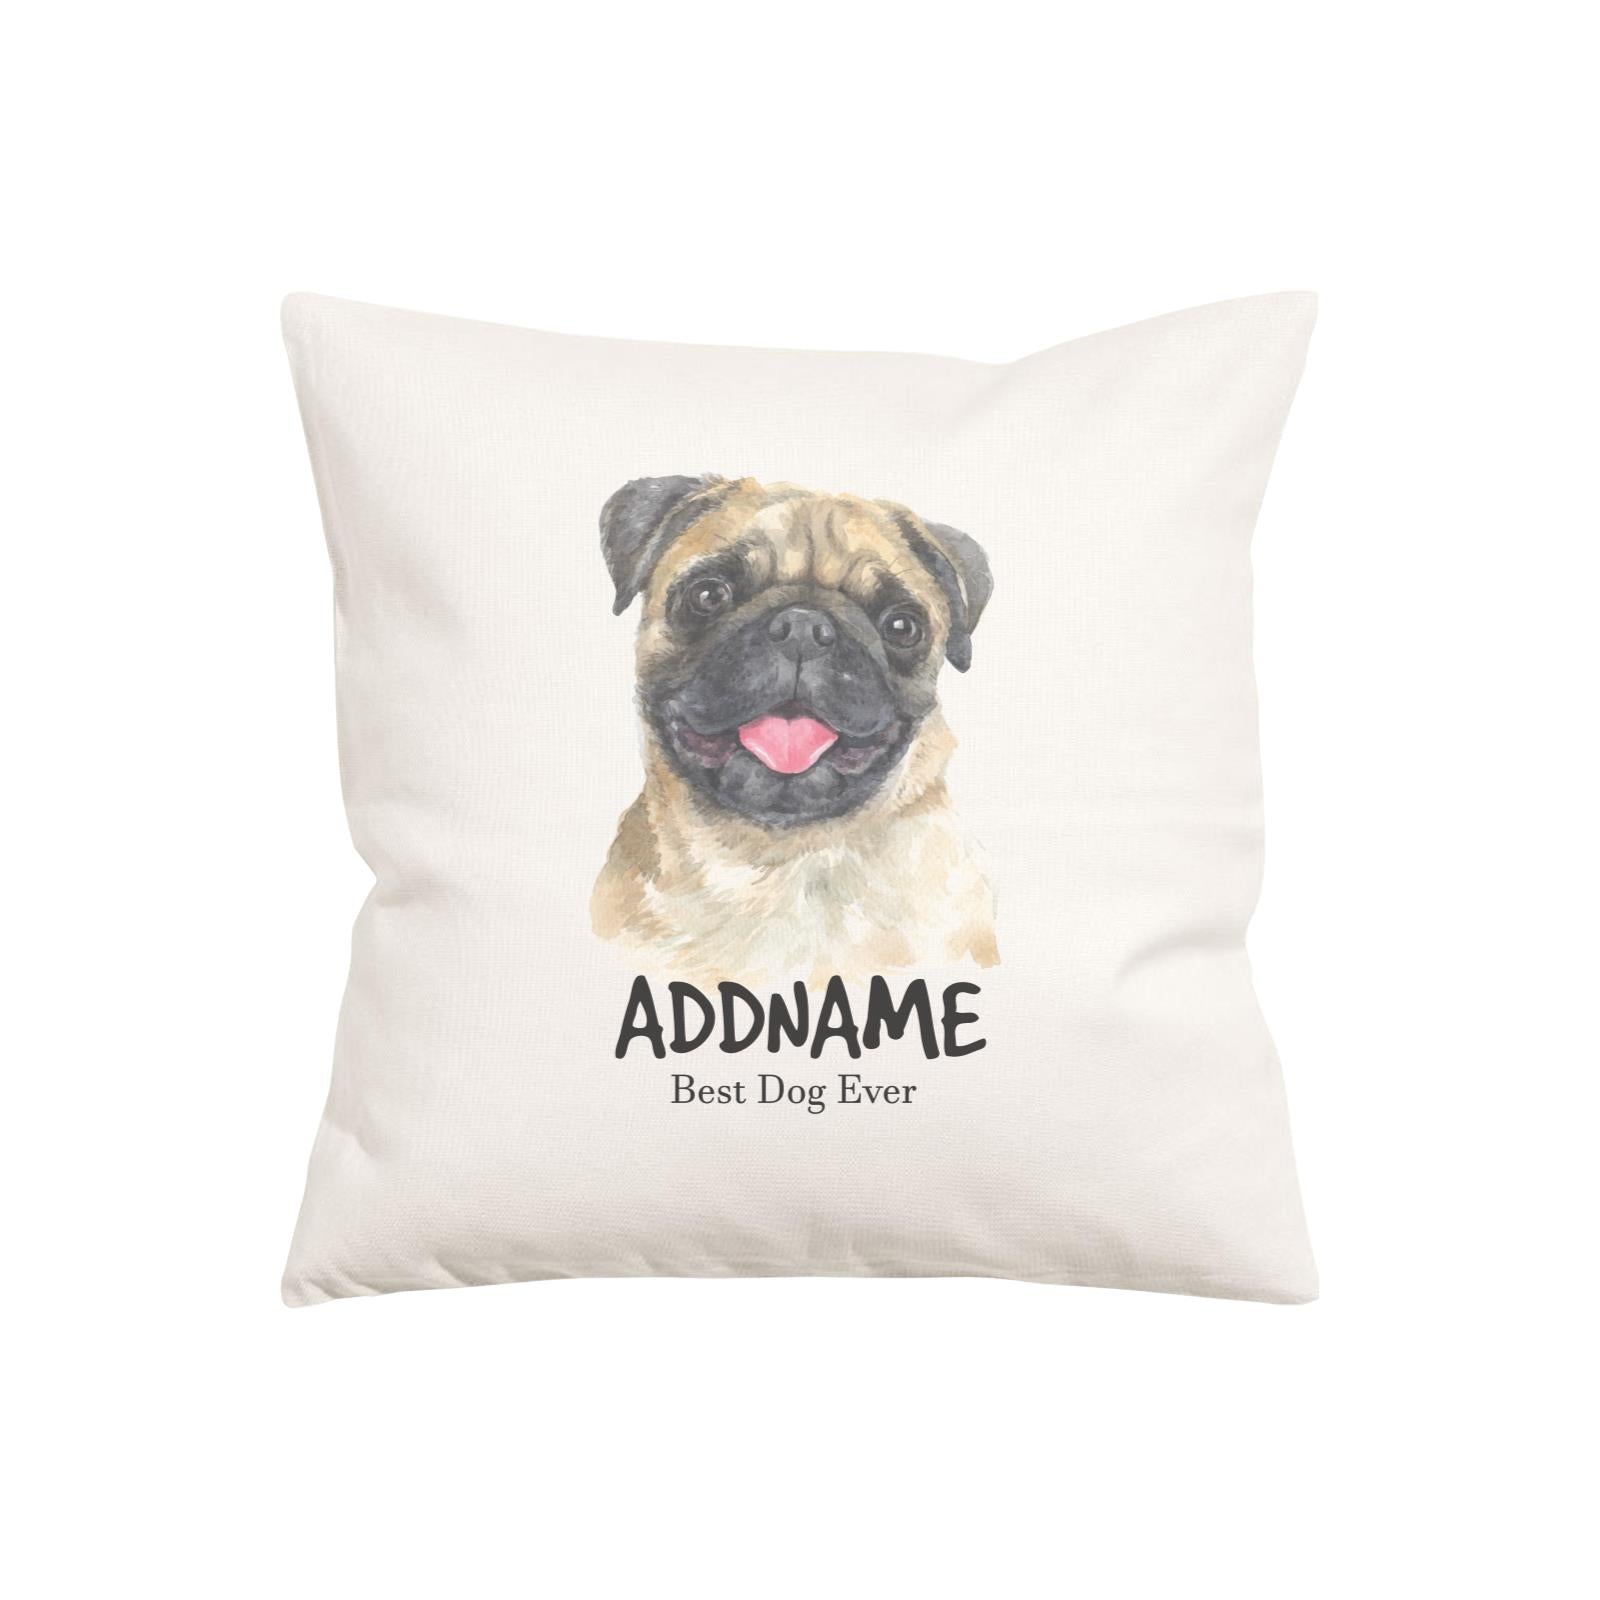 Watercolor Dog Series Pug Happy Best Dog Ever Addname Pillow Cushion